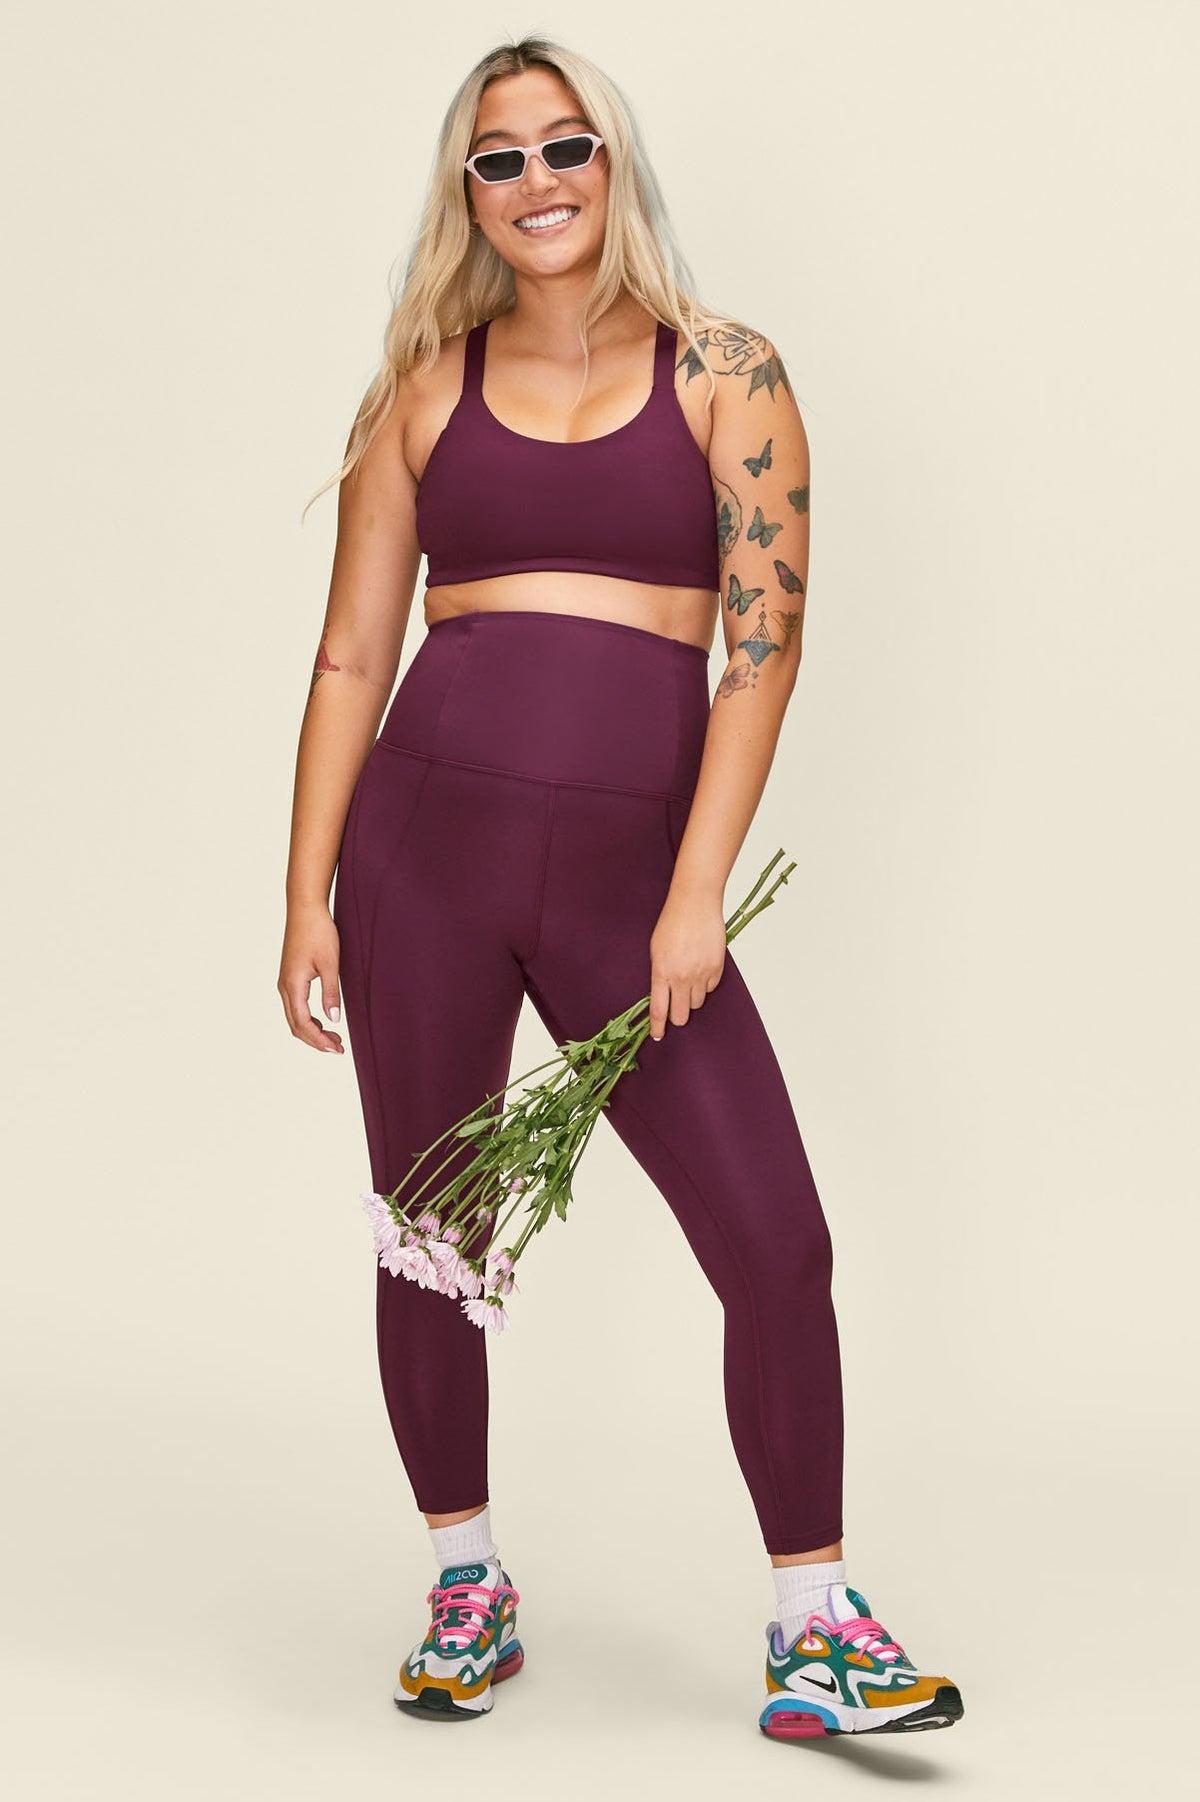 Oprah Loves These Girlfriend Collective Leggings That Are 20% Off